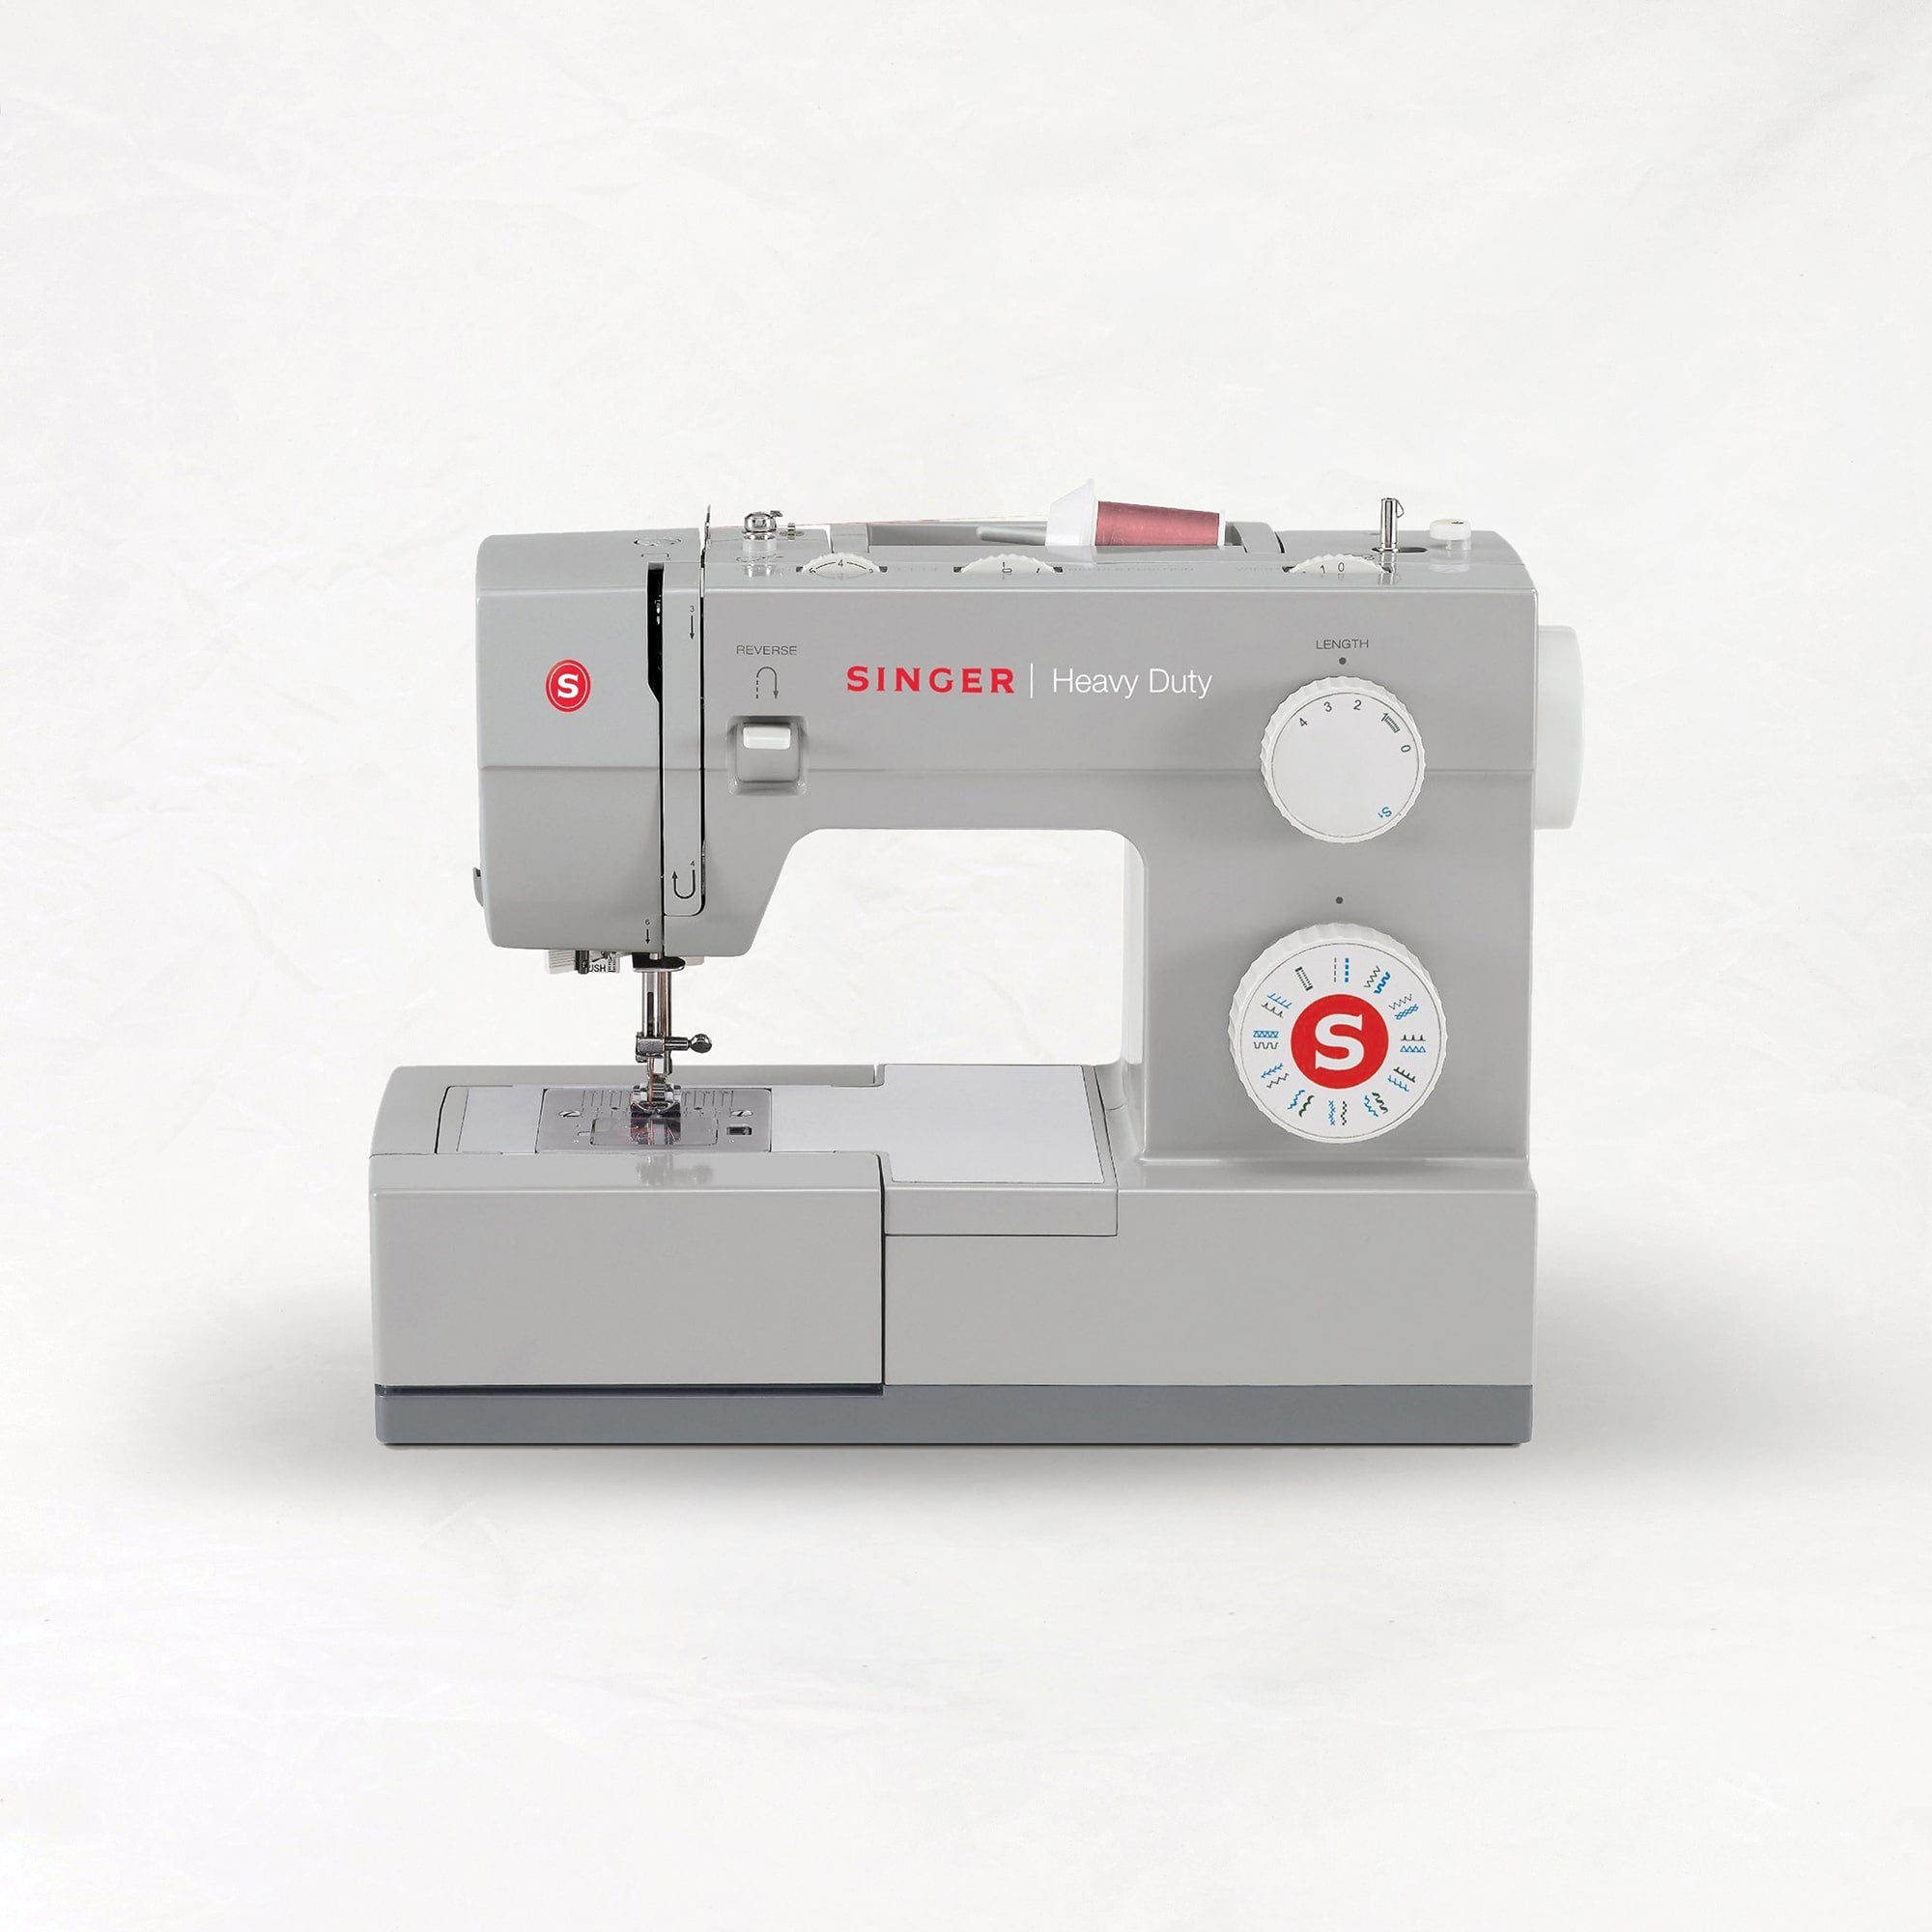 1-on-1 Sewing Machine Class – The Mane Kouture